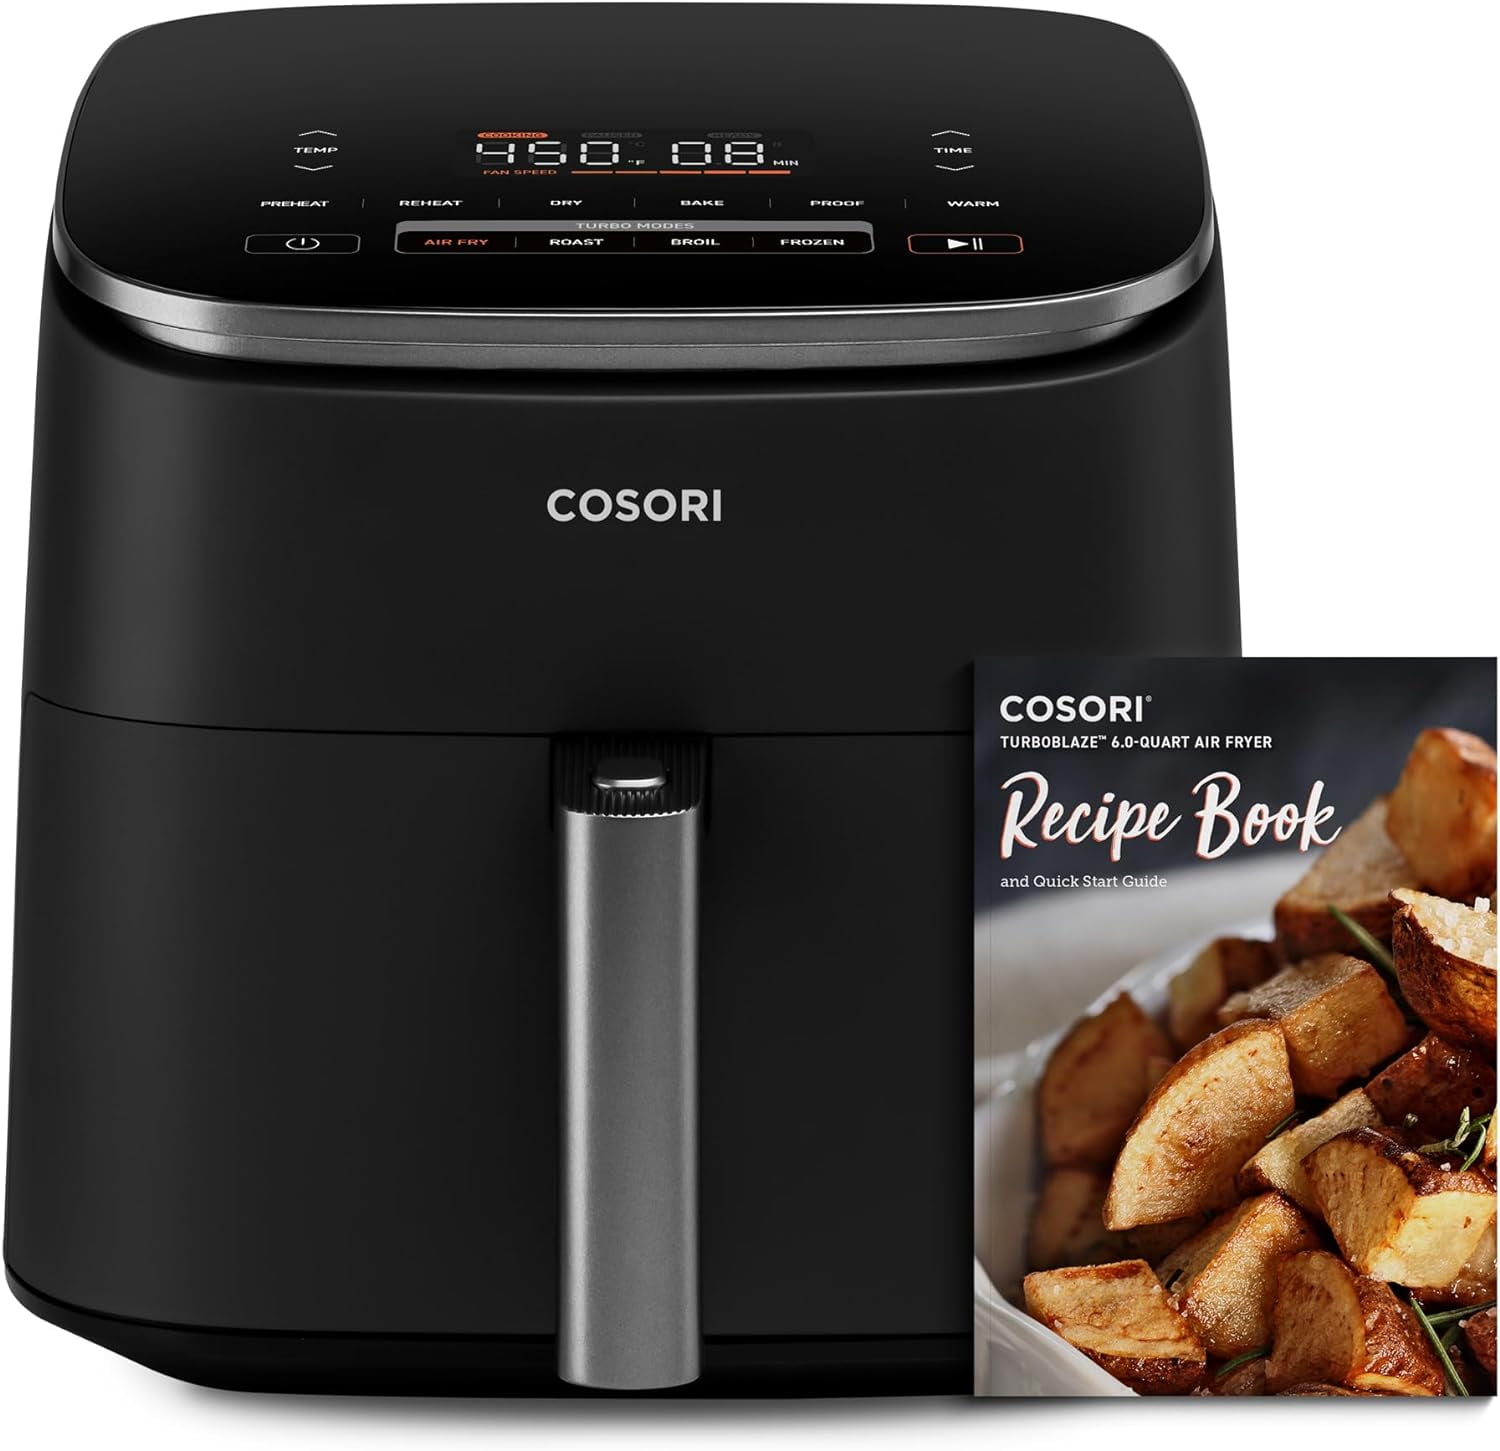 COSORI Air Fryer TurboBlaze 6.0-Quart Compact Airfryer that Roast, Bake,  Proof, 9 Functions, 5 Speeds, Cooks Quickly, 95% Less Oil for Healthier